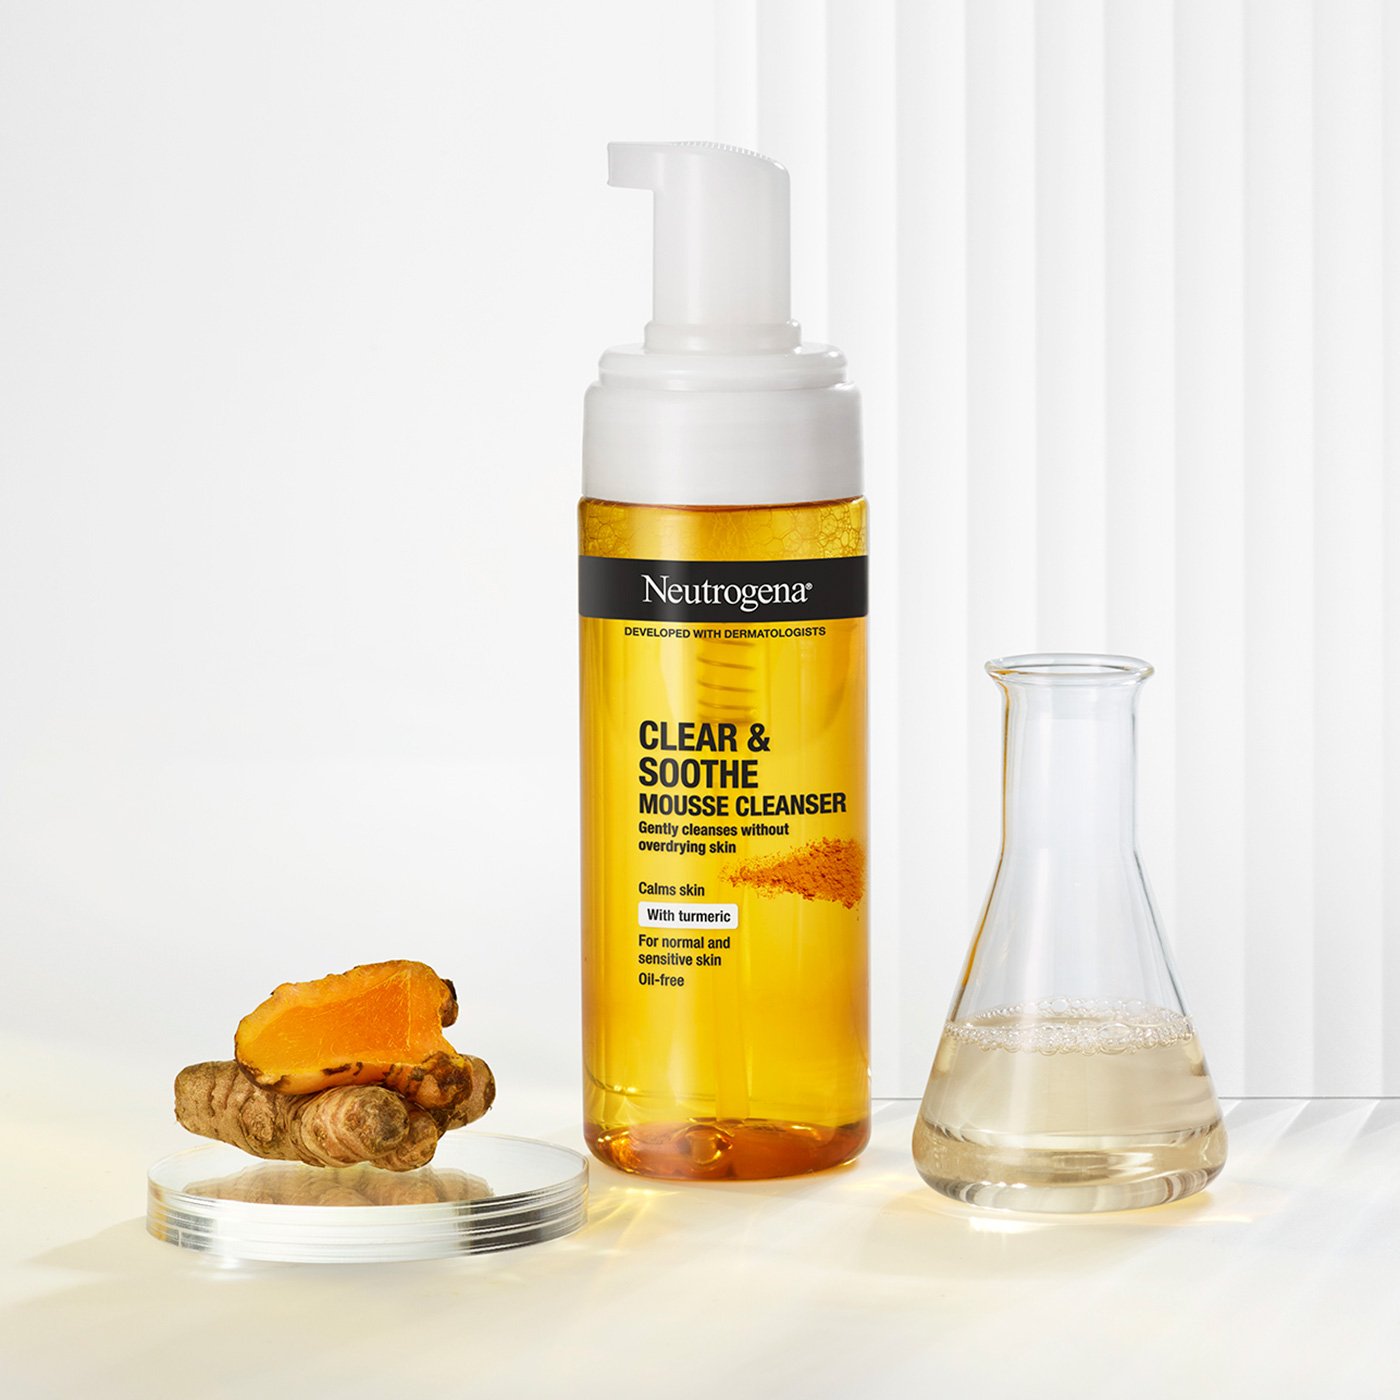 Neutrogena Clear & Soothe Mousse Cleanser With Turmeric 150ml